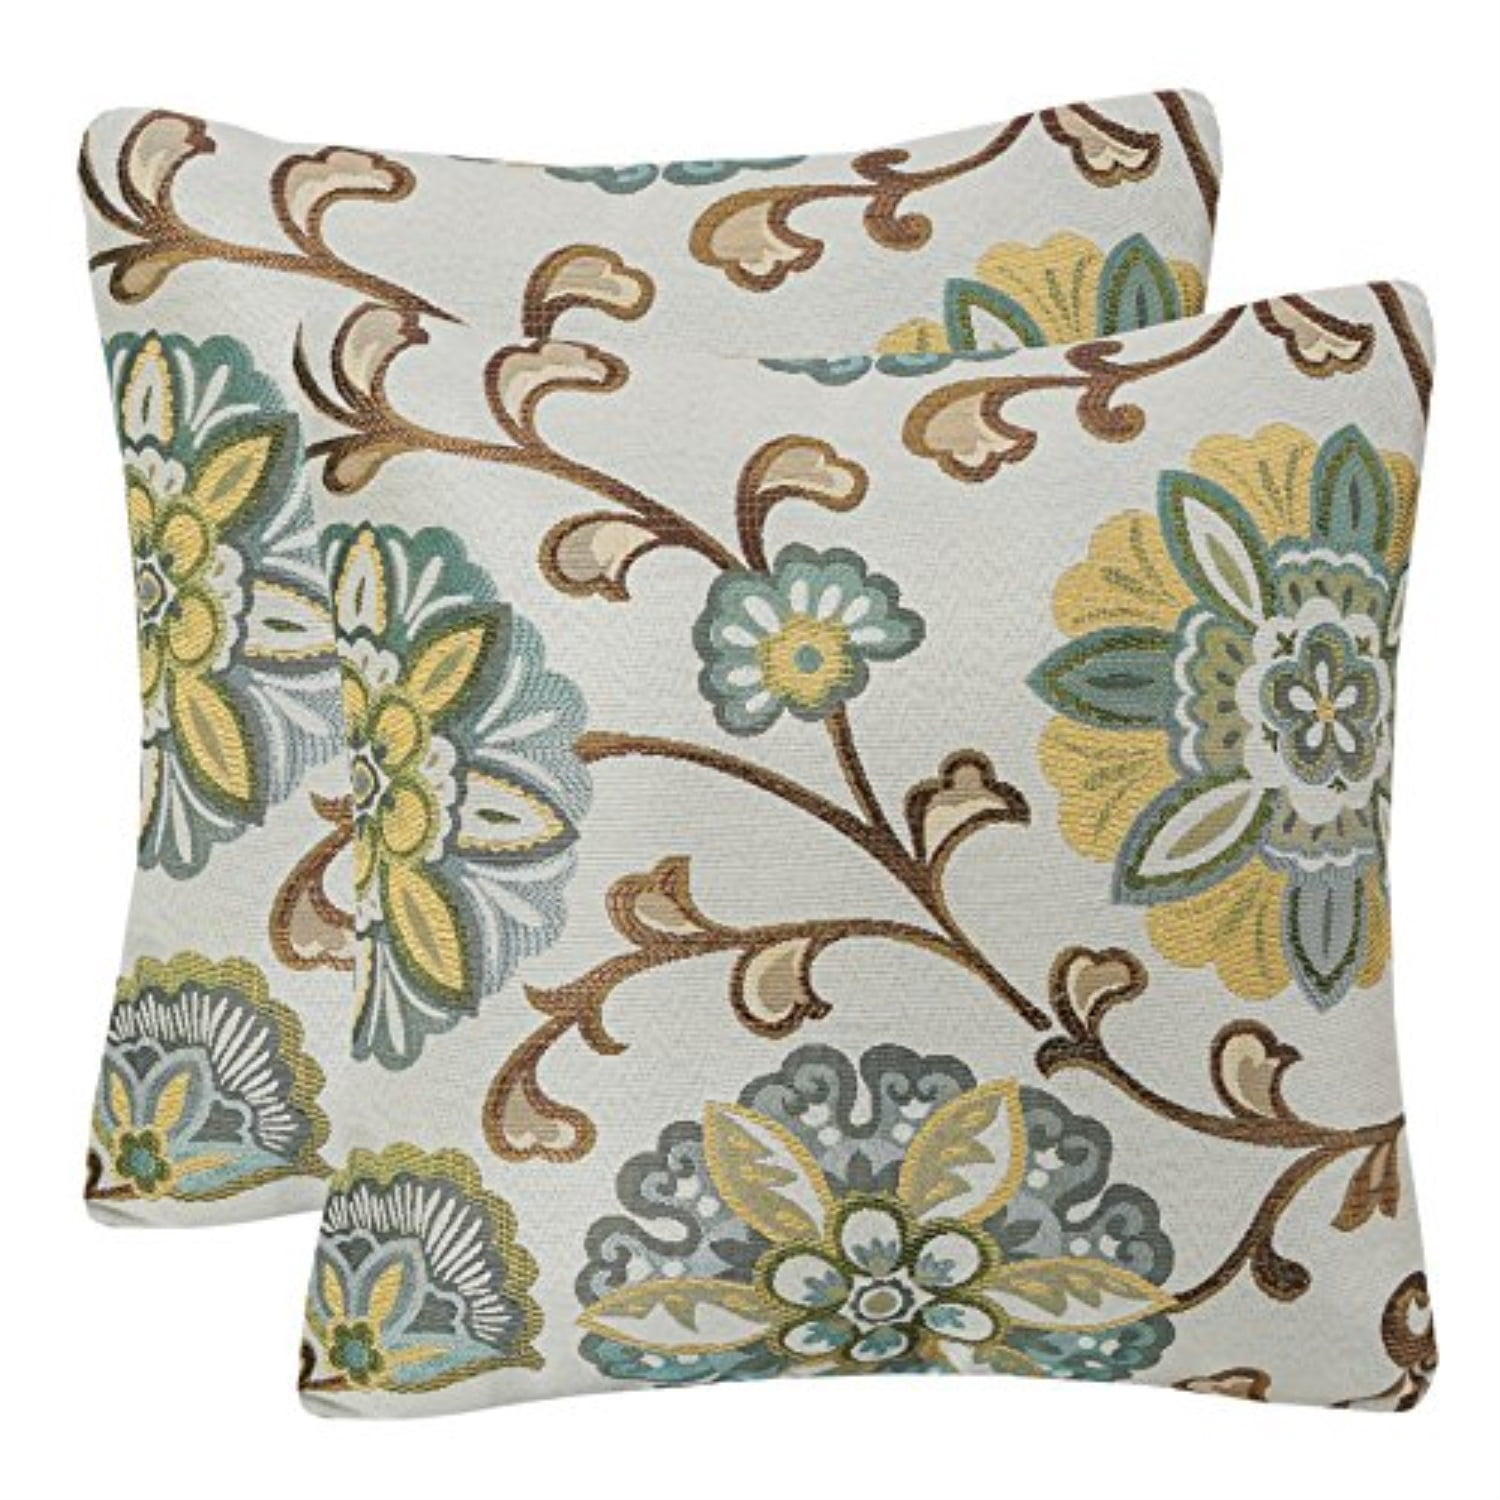 pack of 2 simpledecor throw pillow covers decorative pillow cases, 20x20 inches, jacquard floral